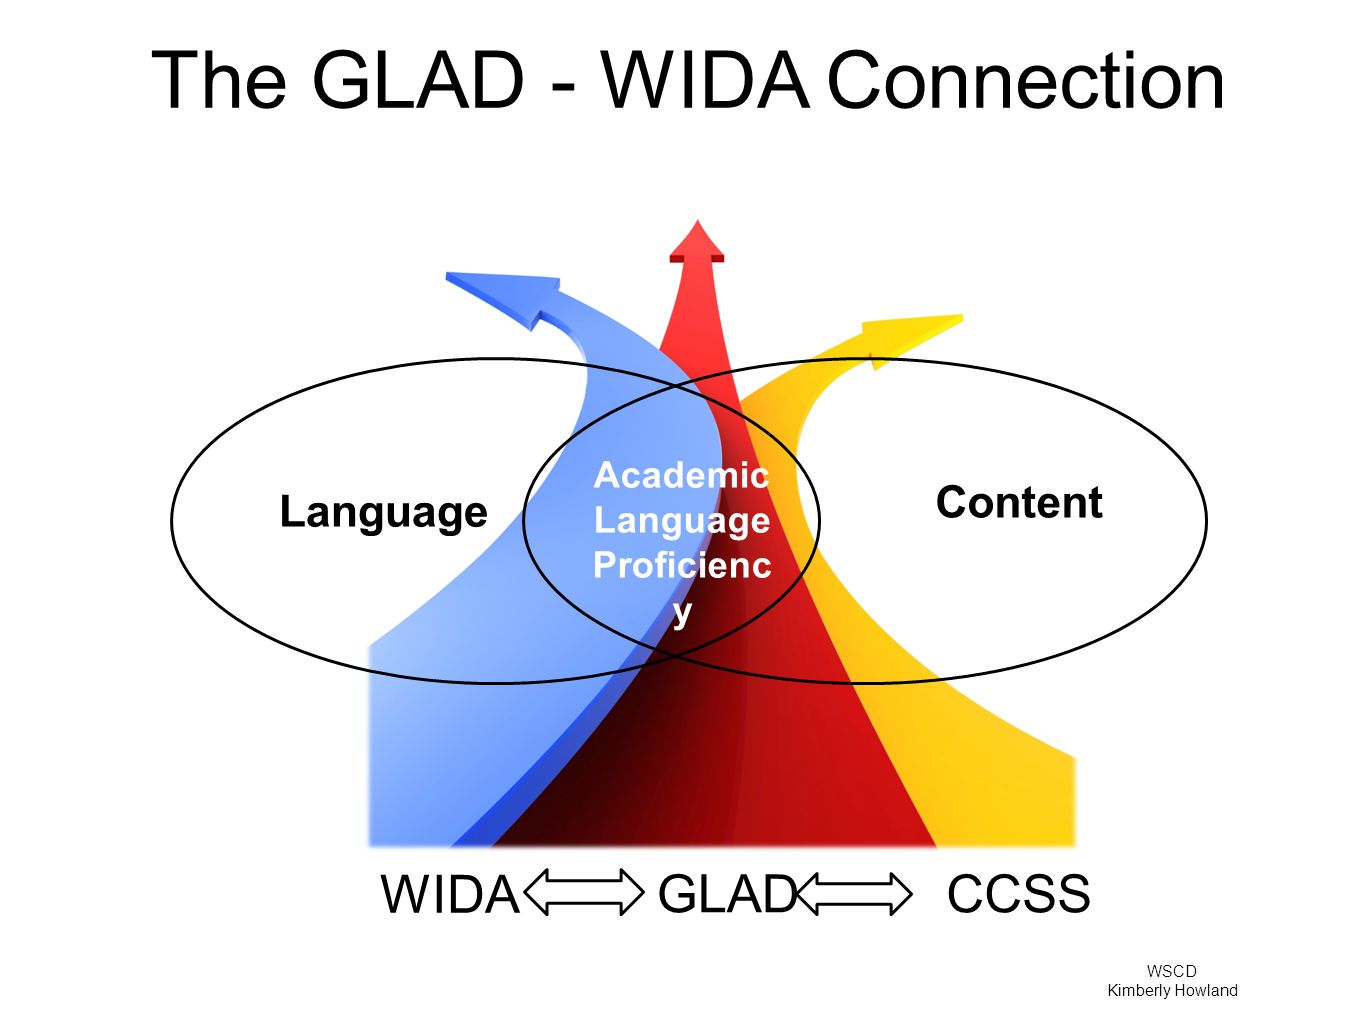 The GLAD - WIDA Connection